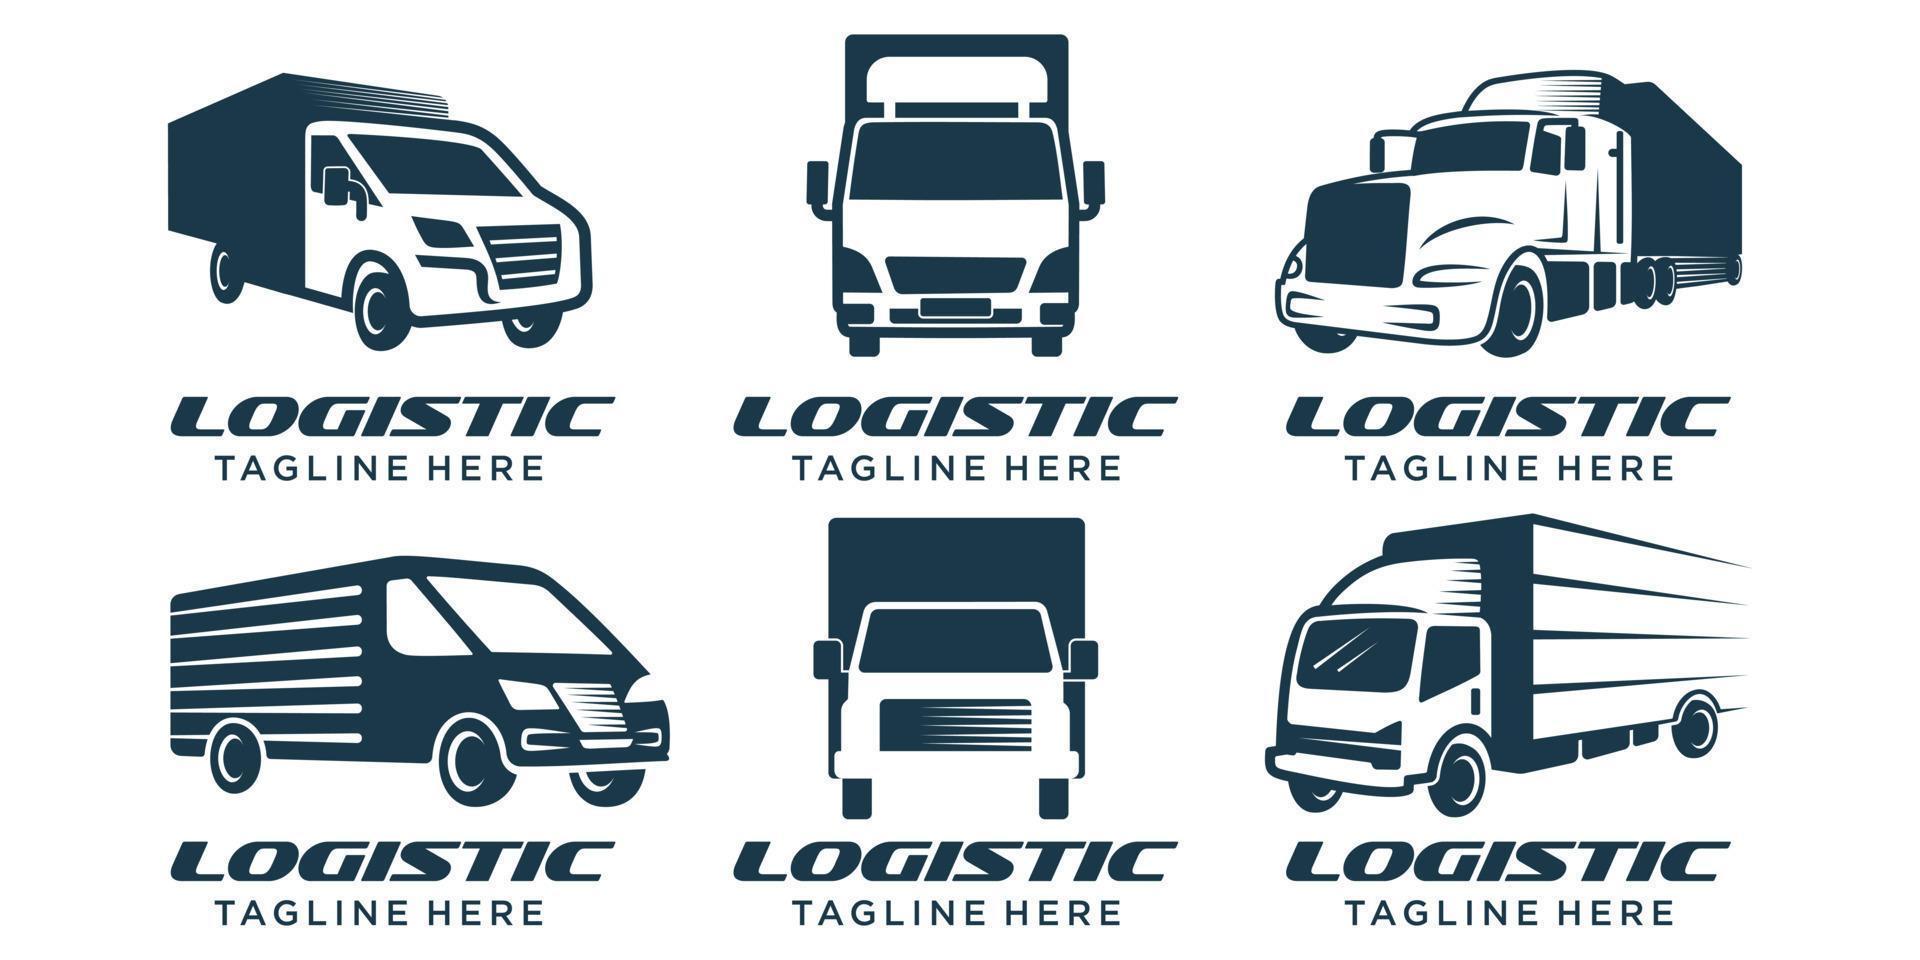 A template of Truck icon set Logo design vector, cargo, delivery, Logistic vector